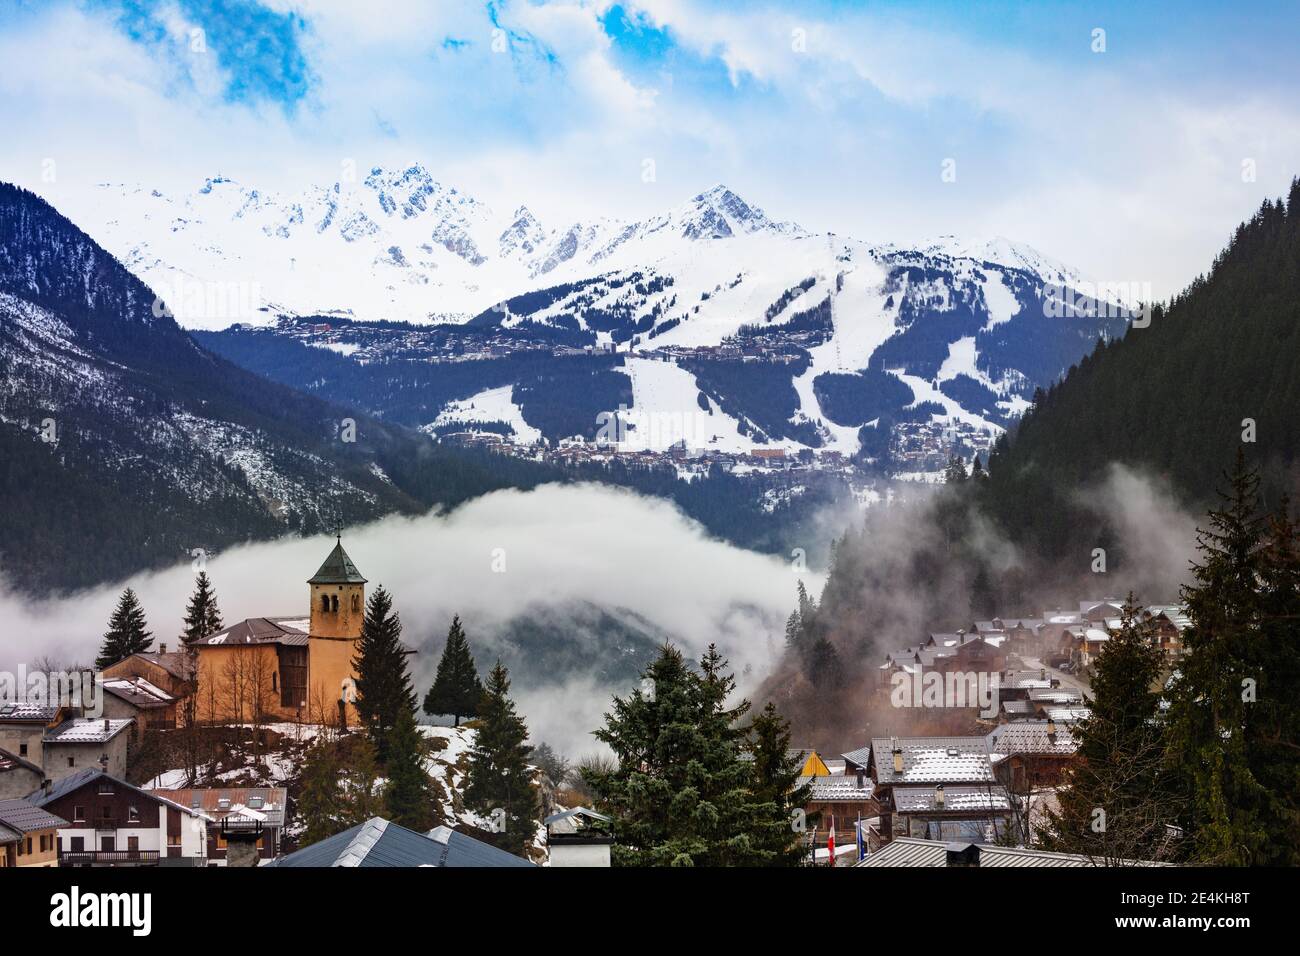 Champagny-en-Vanoise village panorama with mist and clouds around old church, over Courchevel resort on background Stock Photo